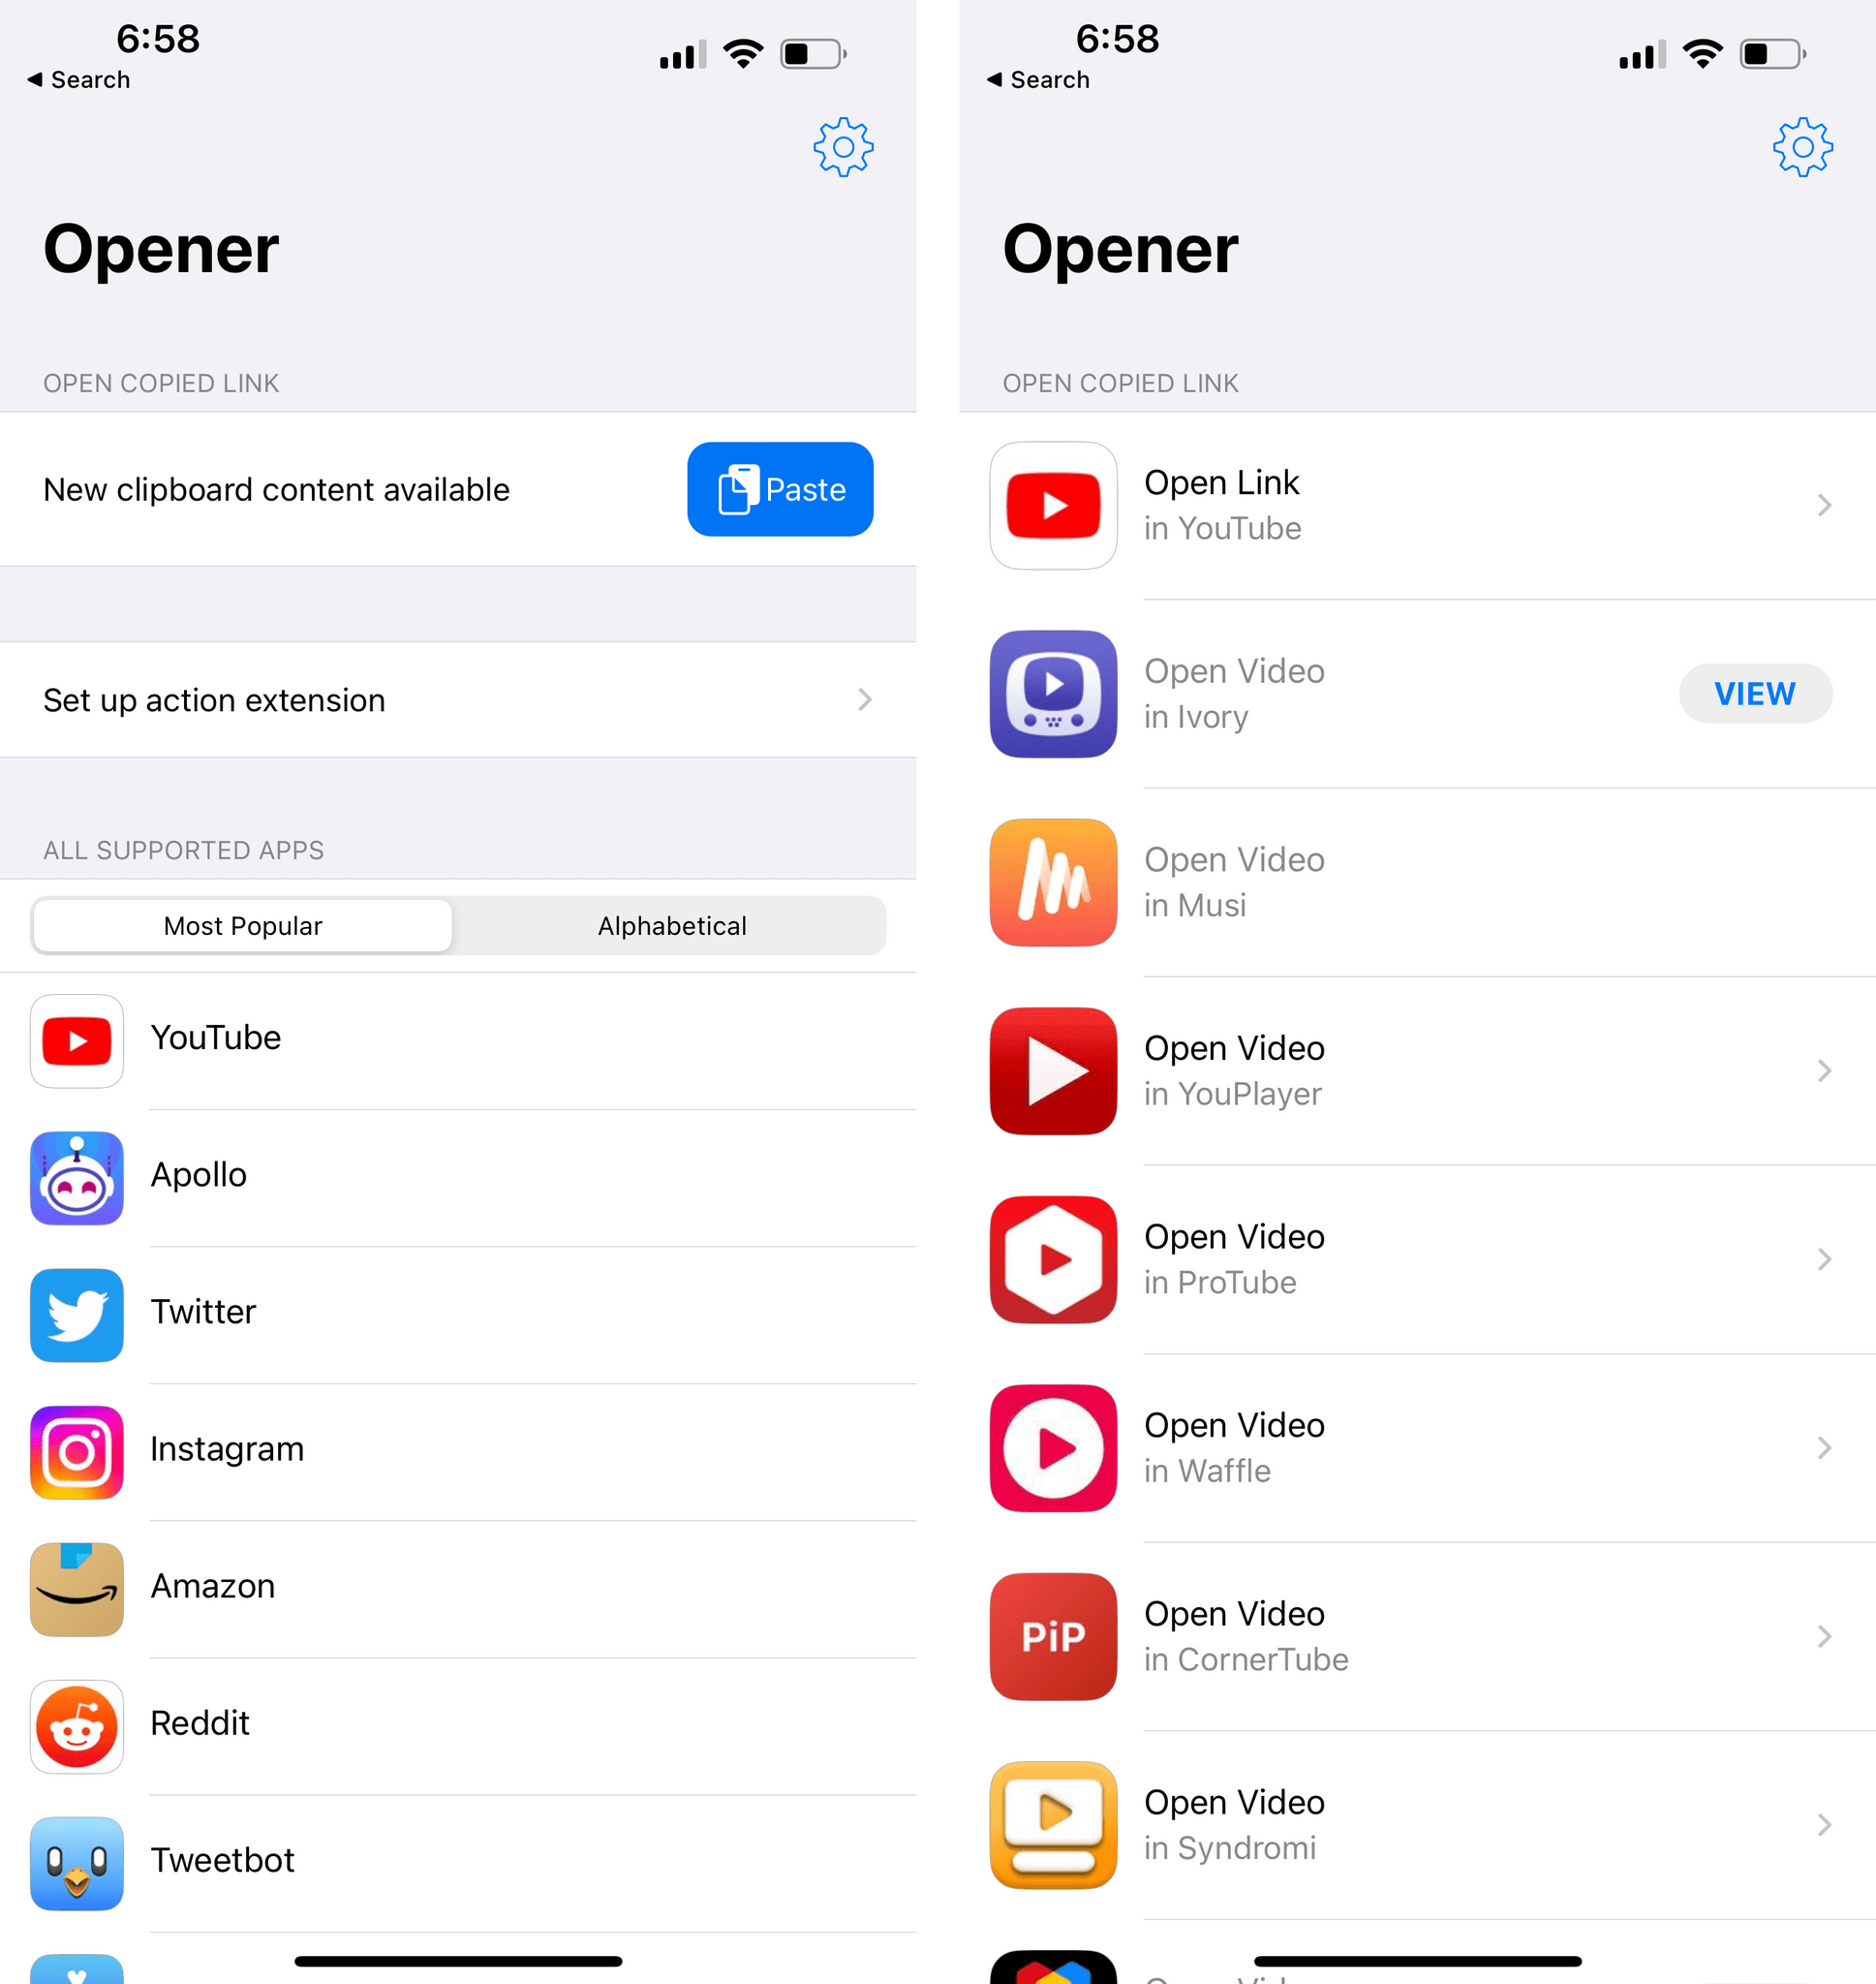 Opener is an example of an app that has switched to Apple's recommended Paste button.